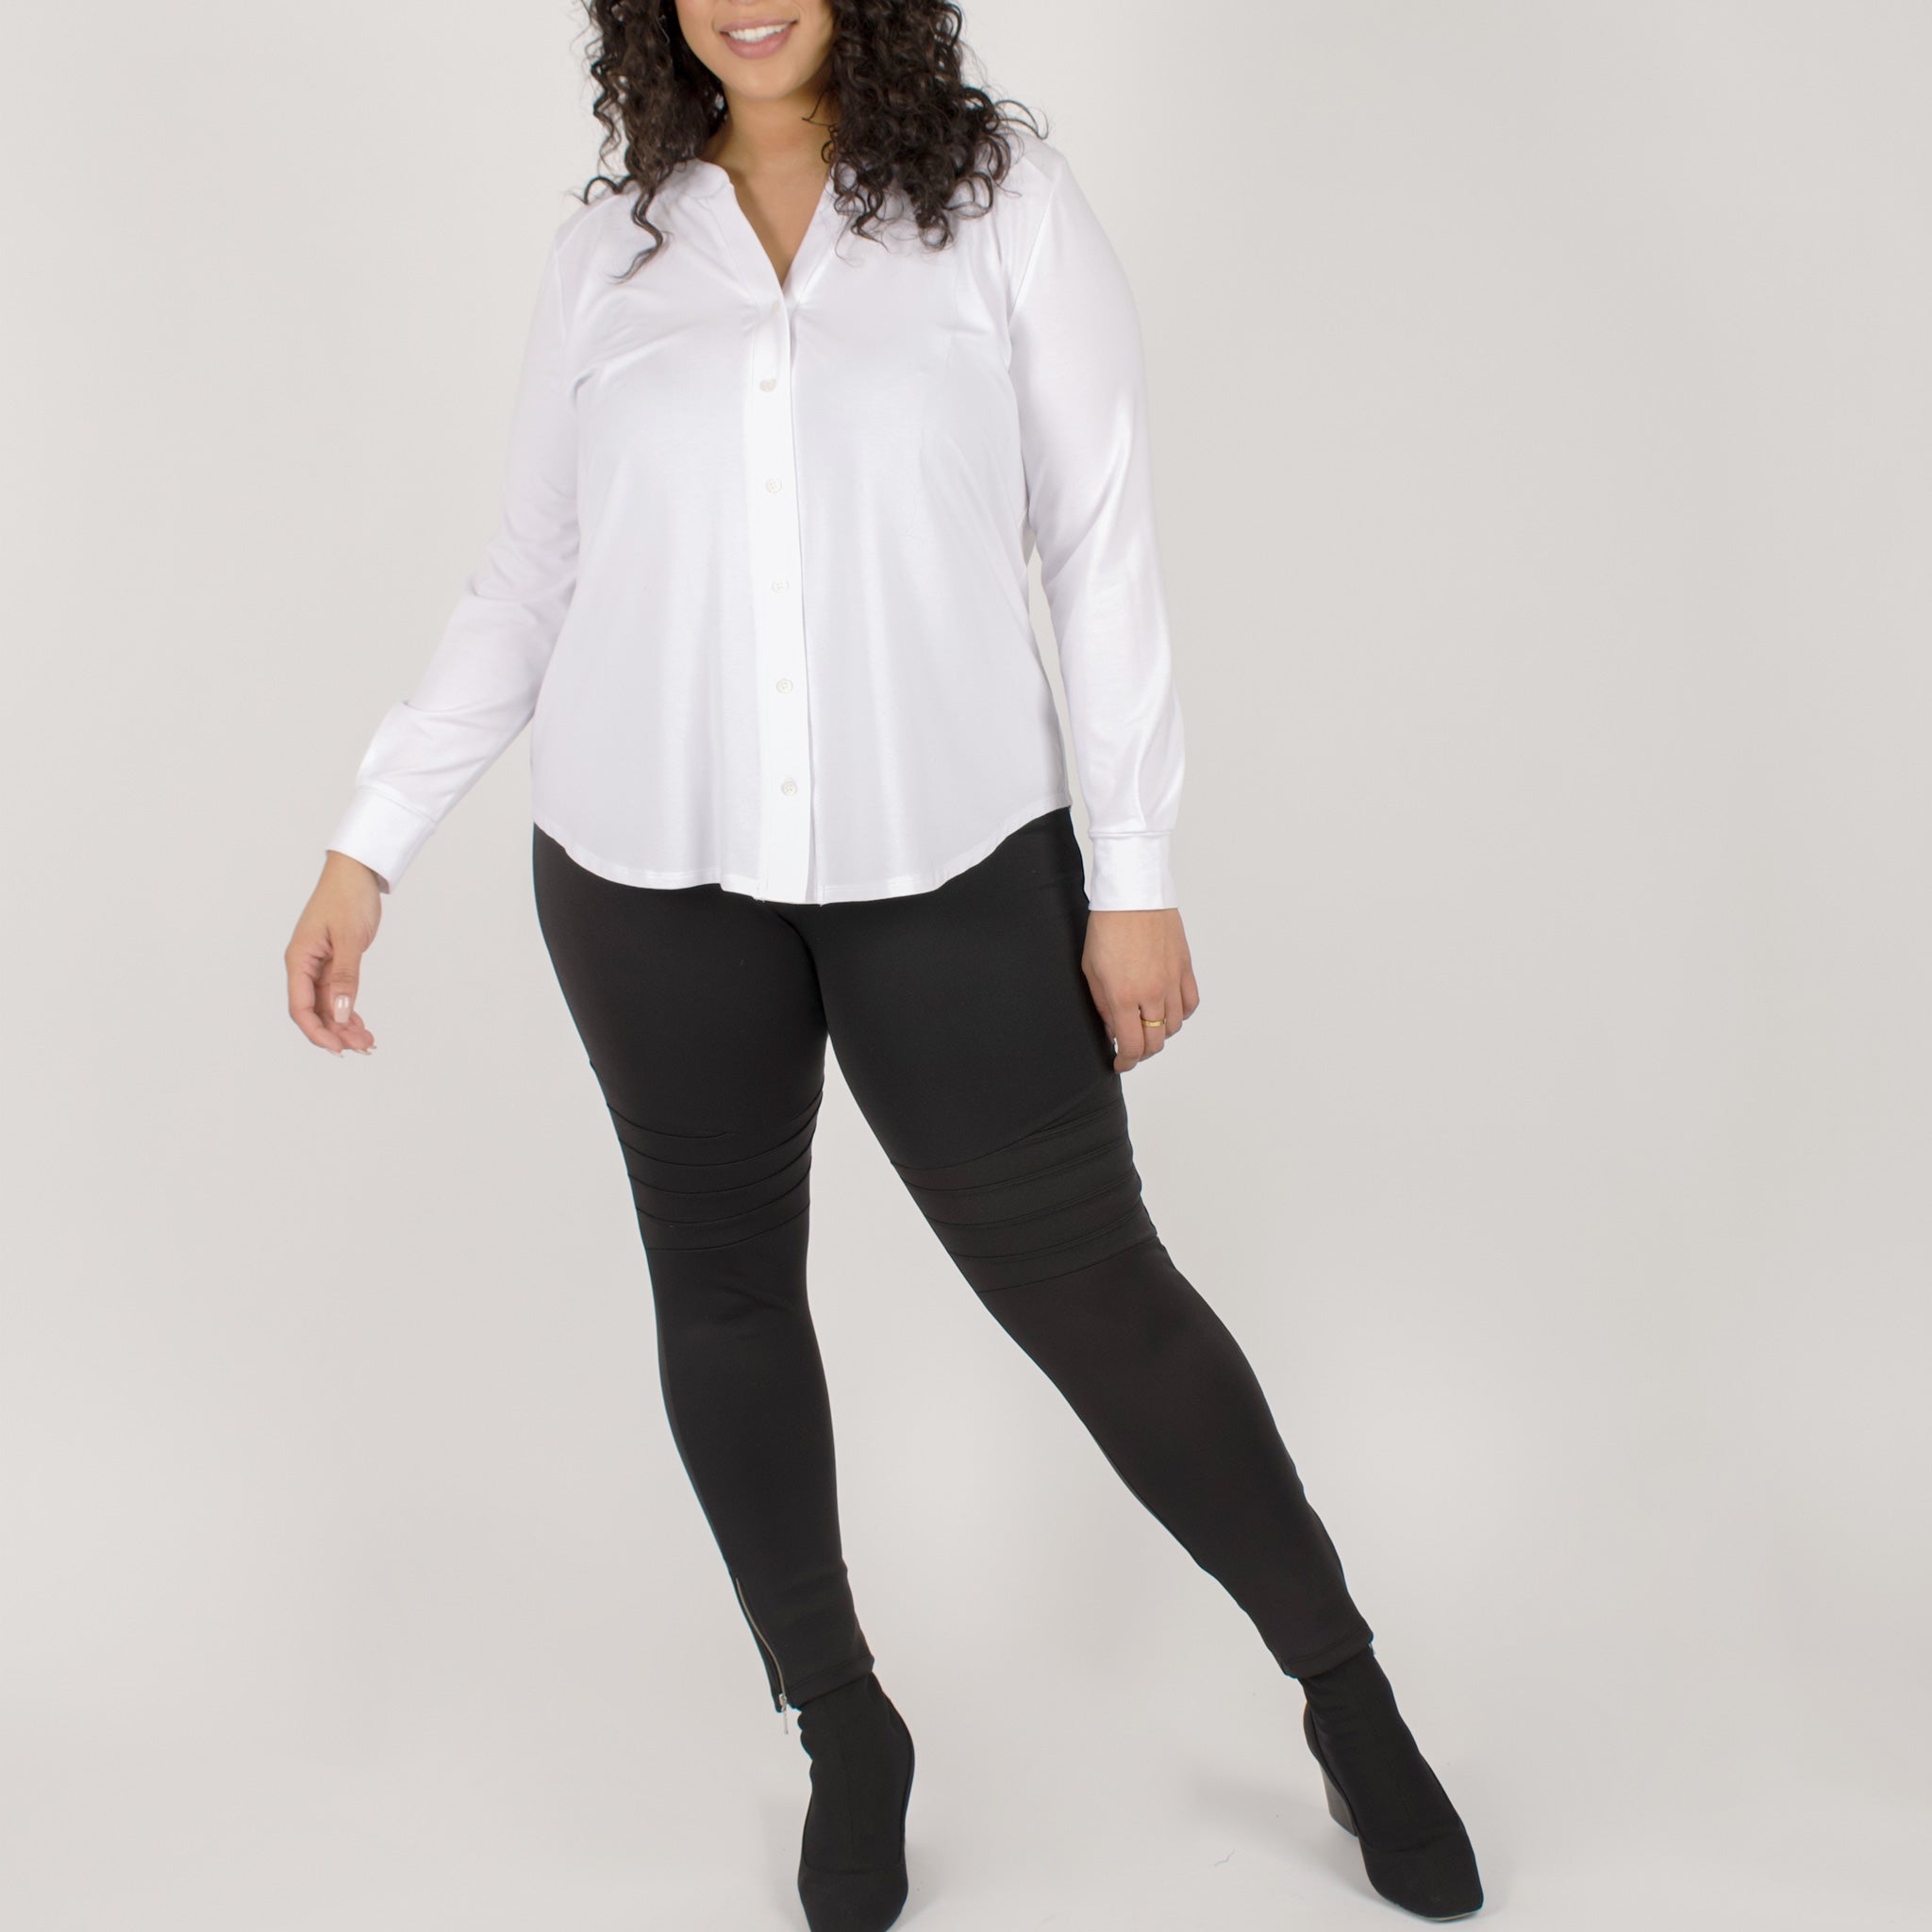 Woman wearing white long sleeve button up shirt with black tapered sweatpants